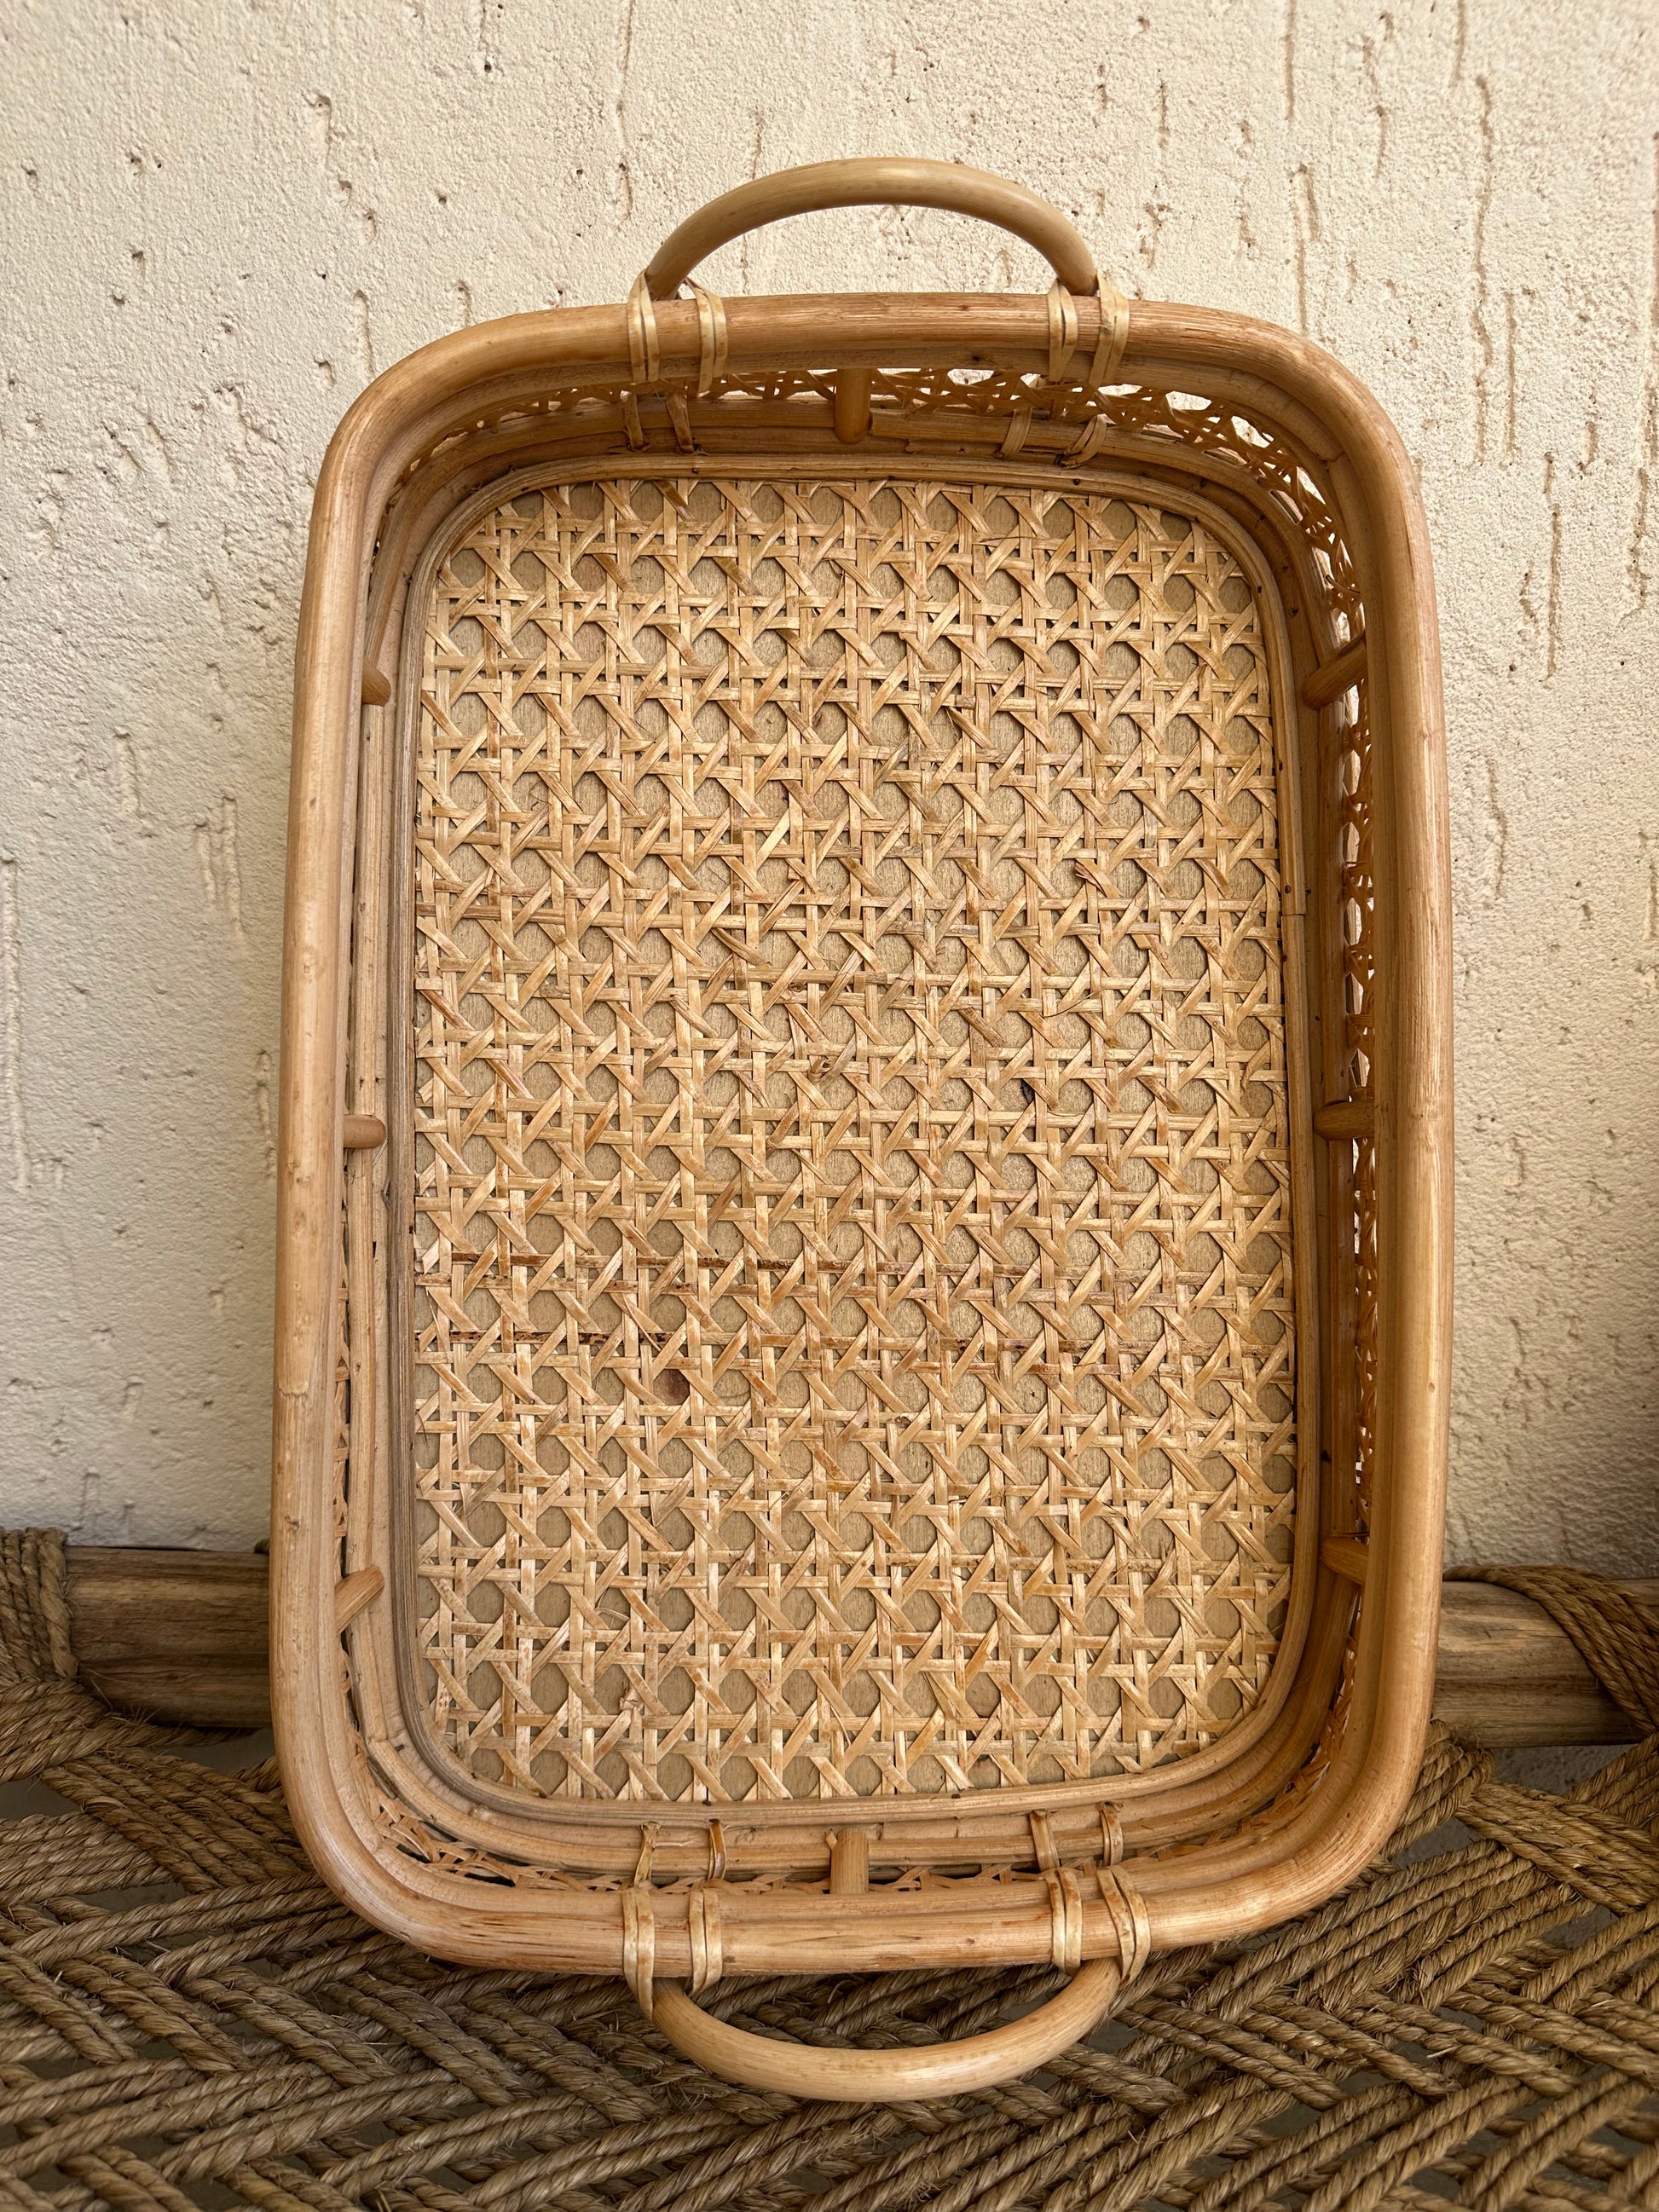 This lovely rattan tray is a must have to create stylish spaces. In effortlessly chic hand-woven cane with detailed wicker pattern makes it an eye catcher. This multipurpose tray look gorgeous on a coffee table with plants and candles , storage for blankets in living room or place them in bathroom with rolled up towels to merge functionality with stylish charm. TESU